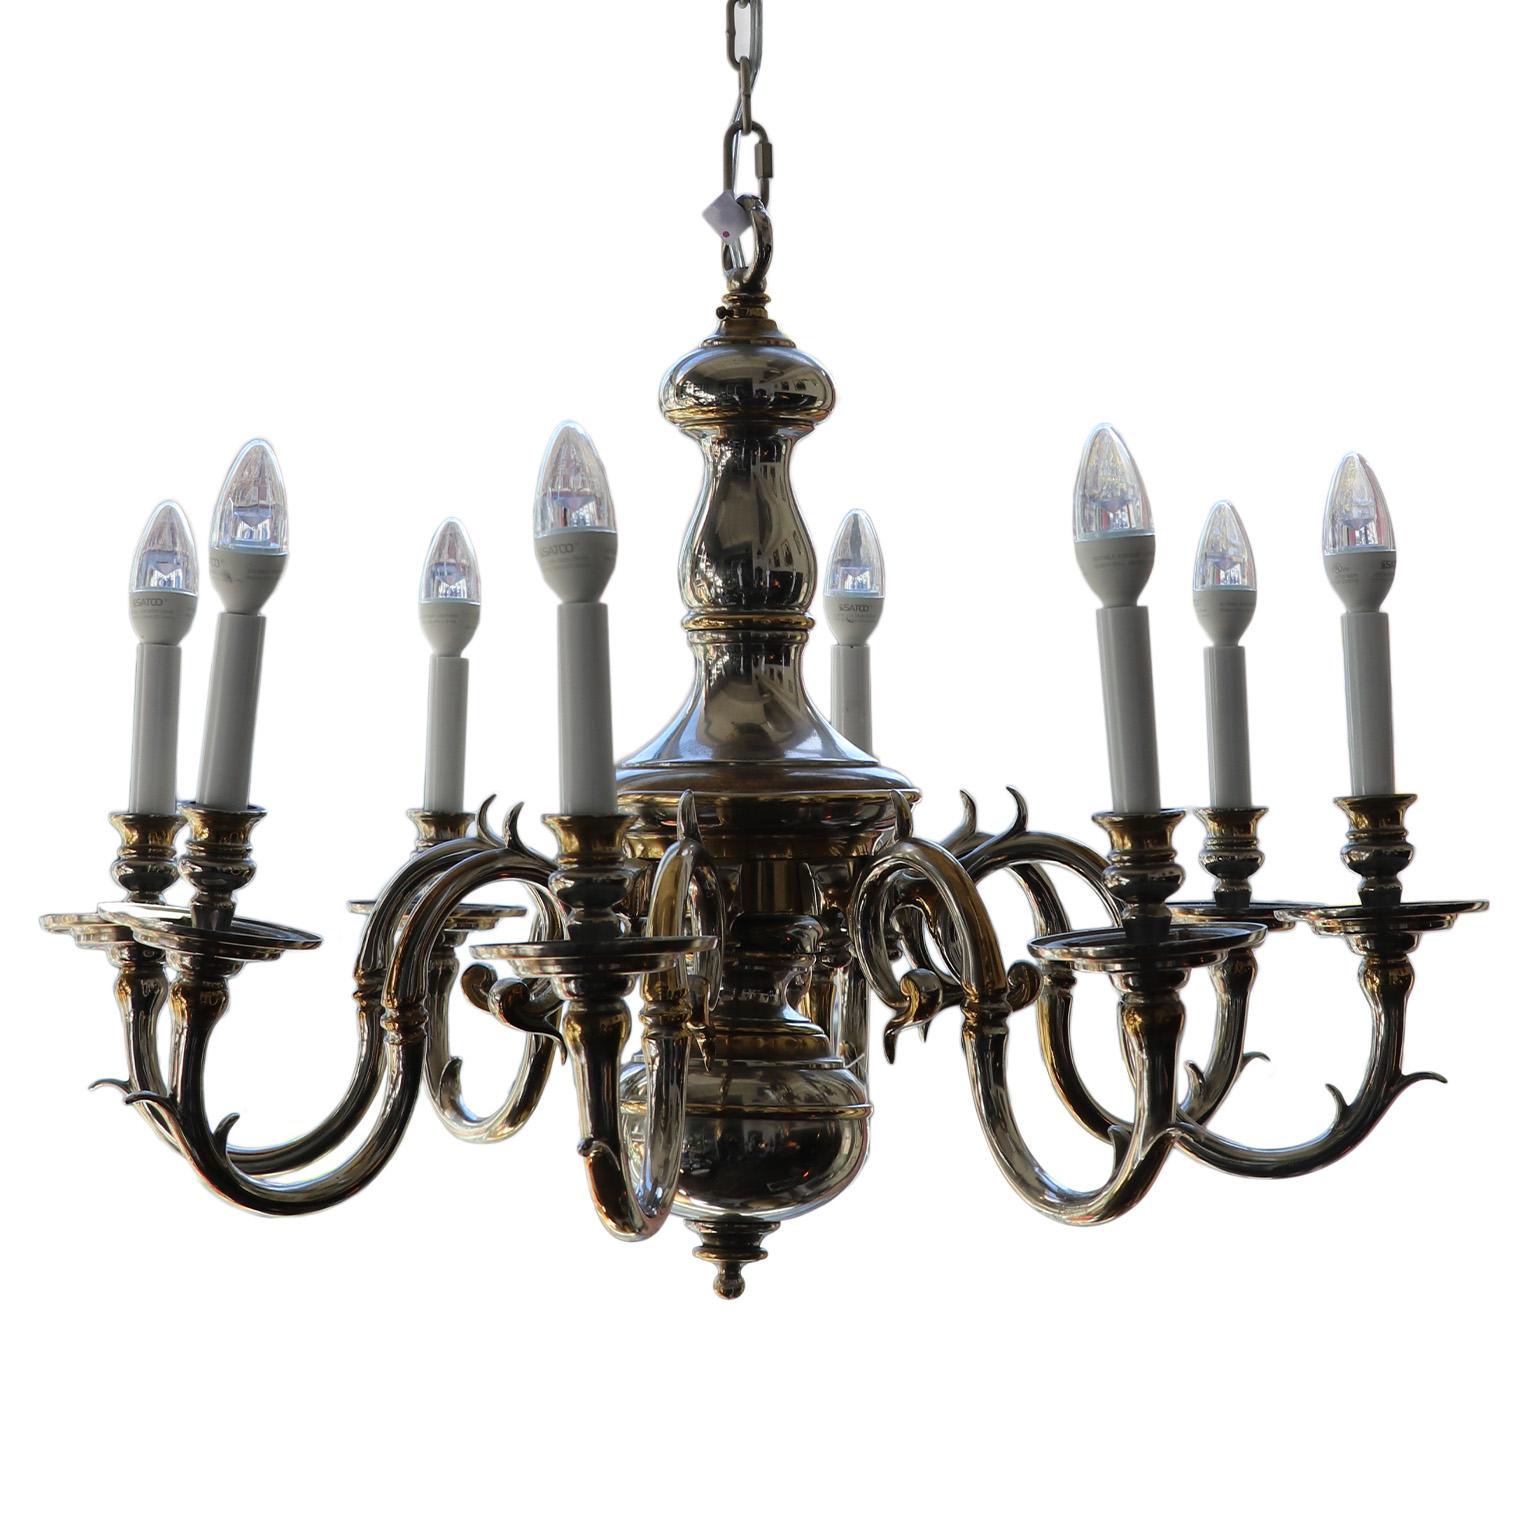 Transform your living space with this magnificent brass chandelier featuring eight arms, elegantly designed to illuminate your home. This stunning centerpiece is ready to add a touch of sophistication and glamour to any room.